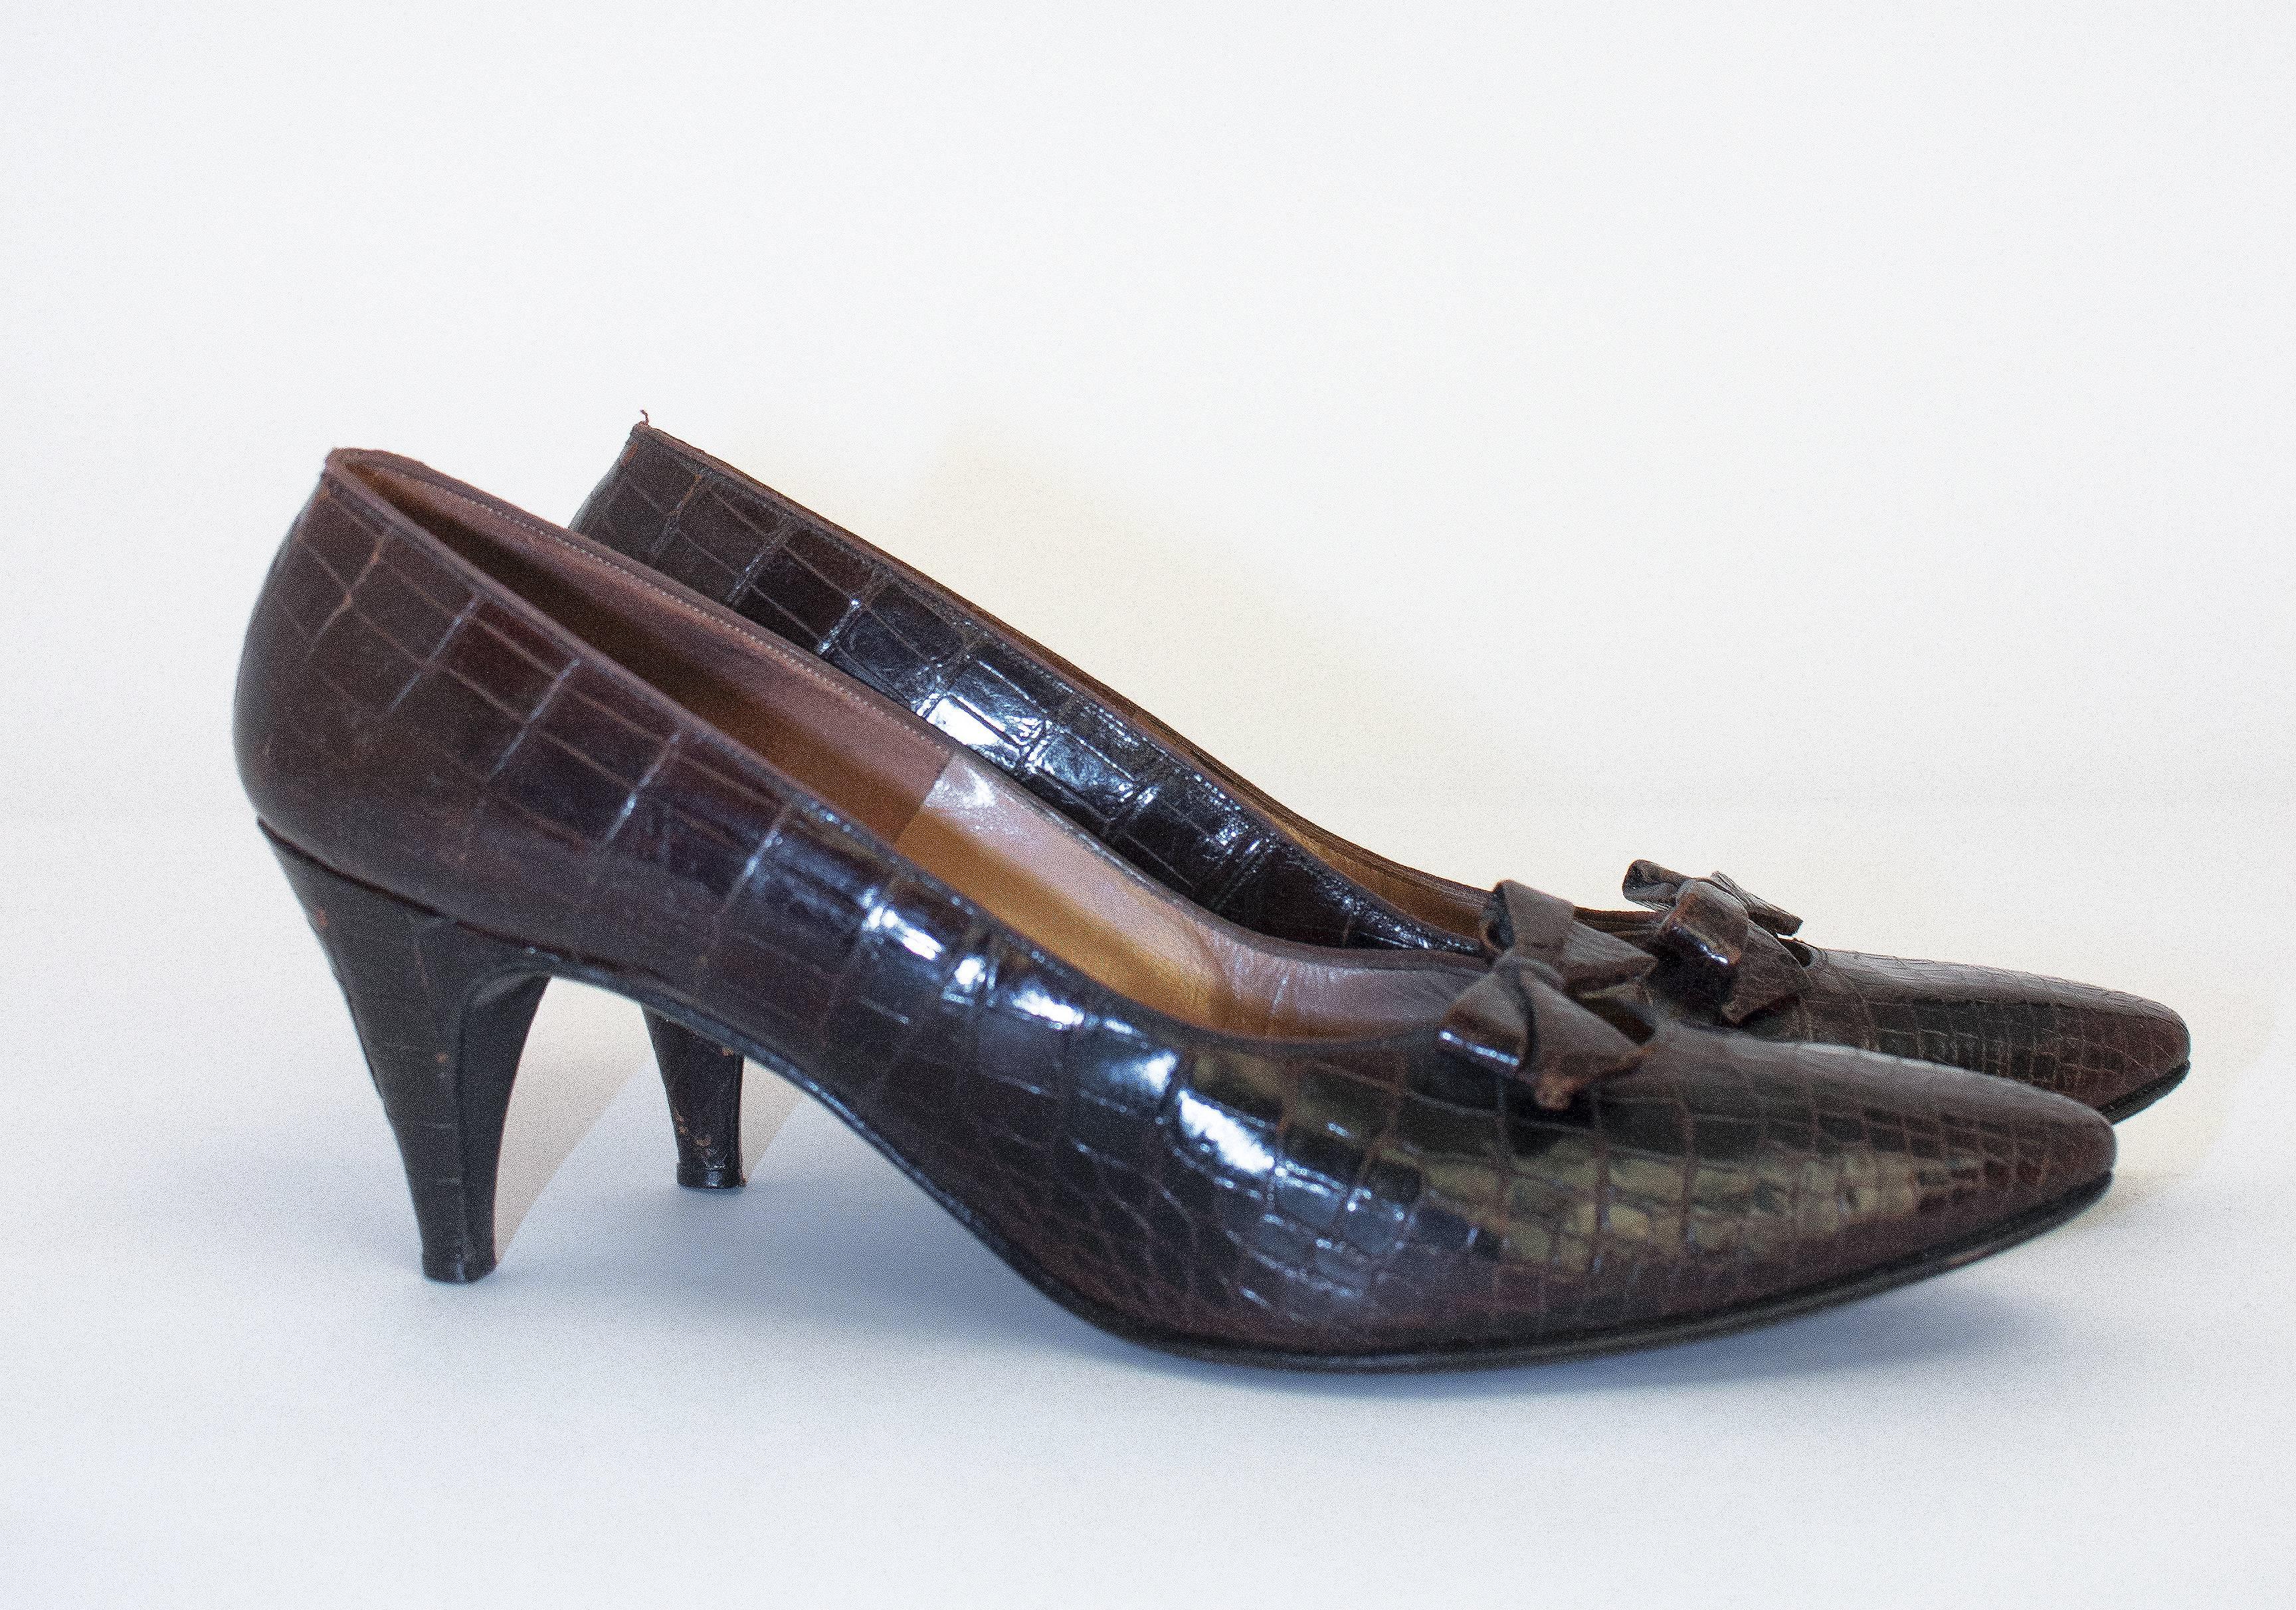 1960s alligator pump with from bow detail. Designed by David E. Evins, 